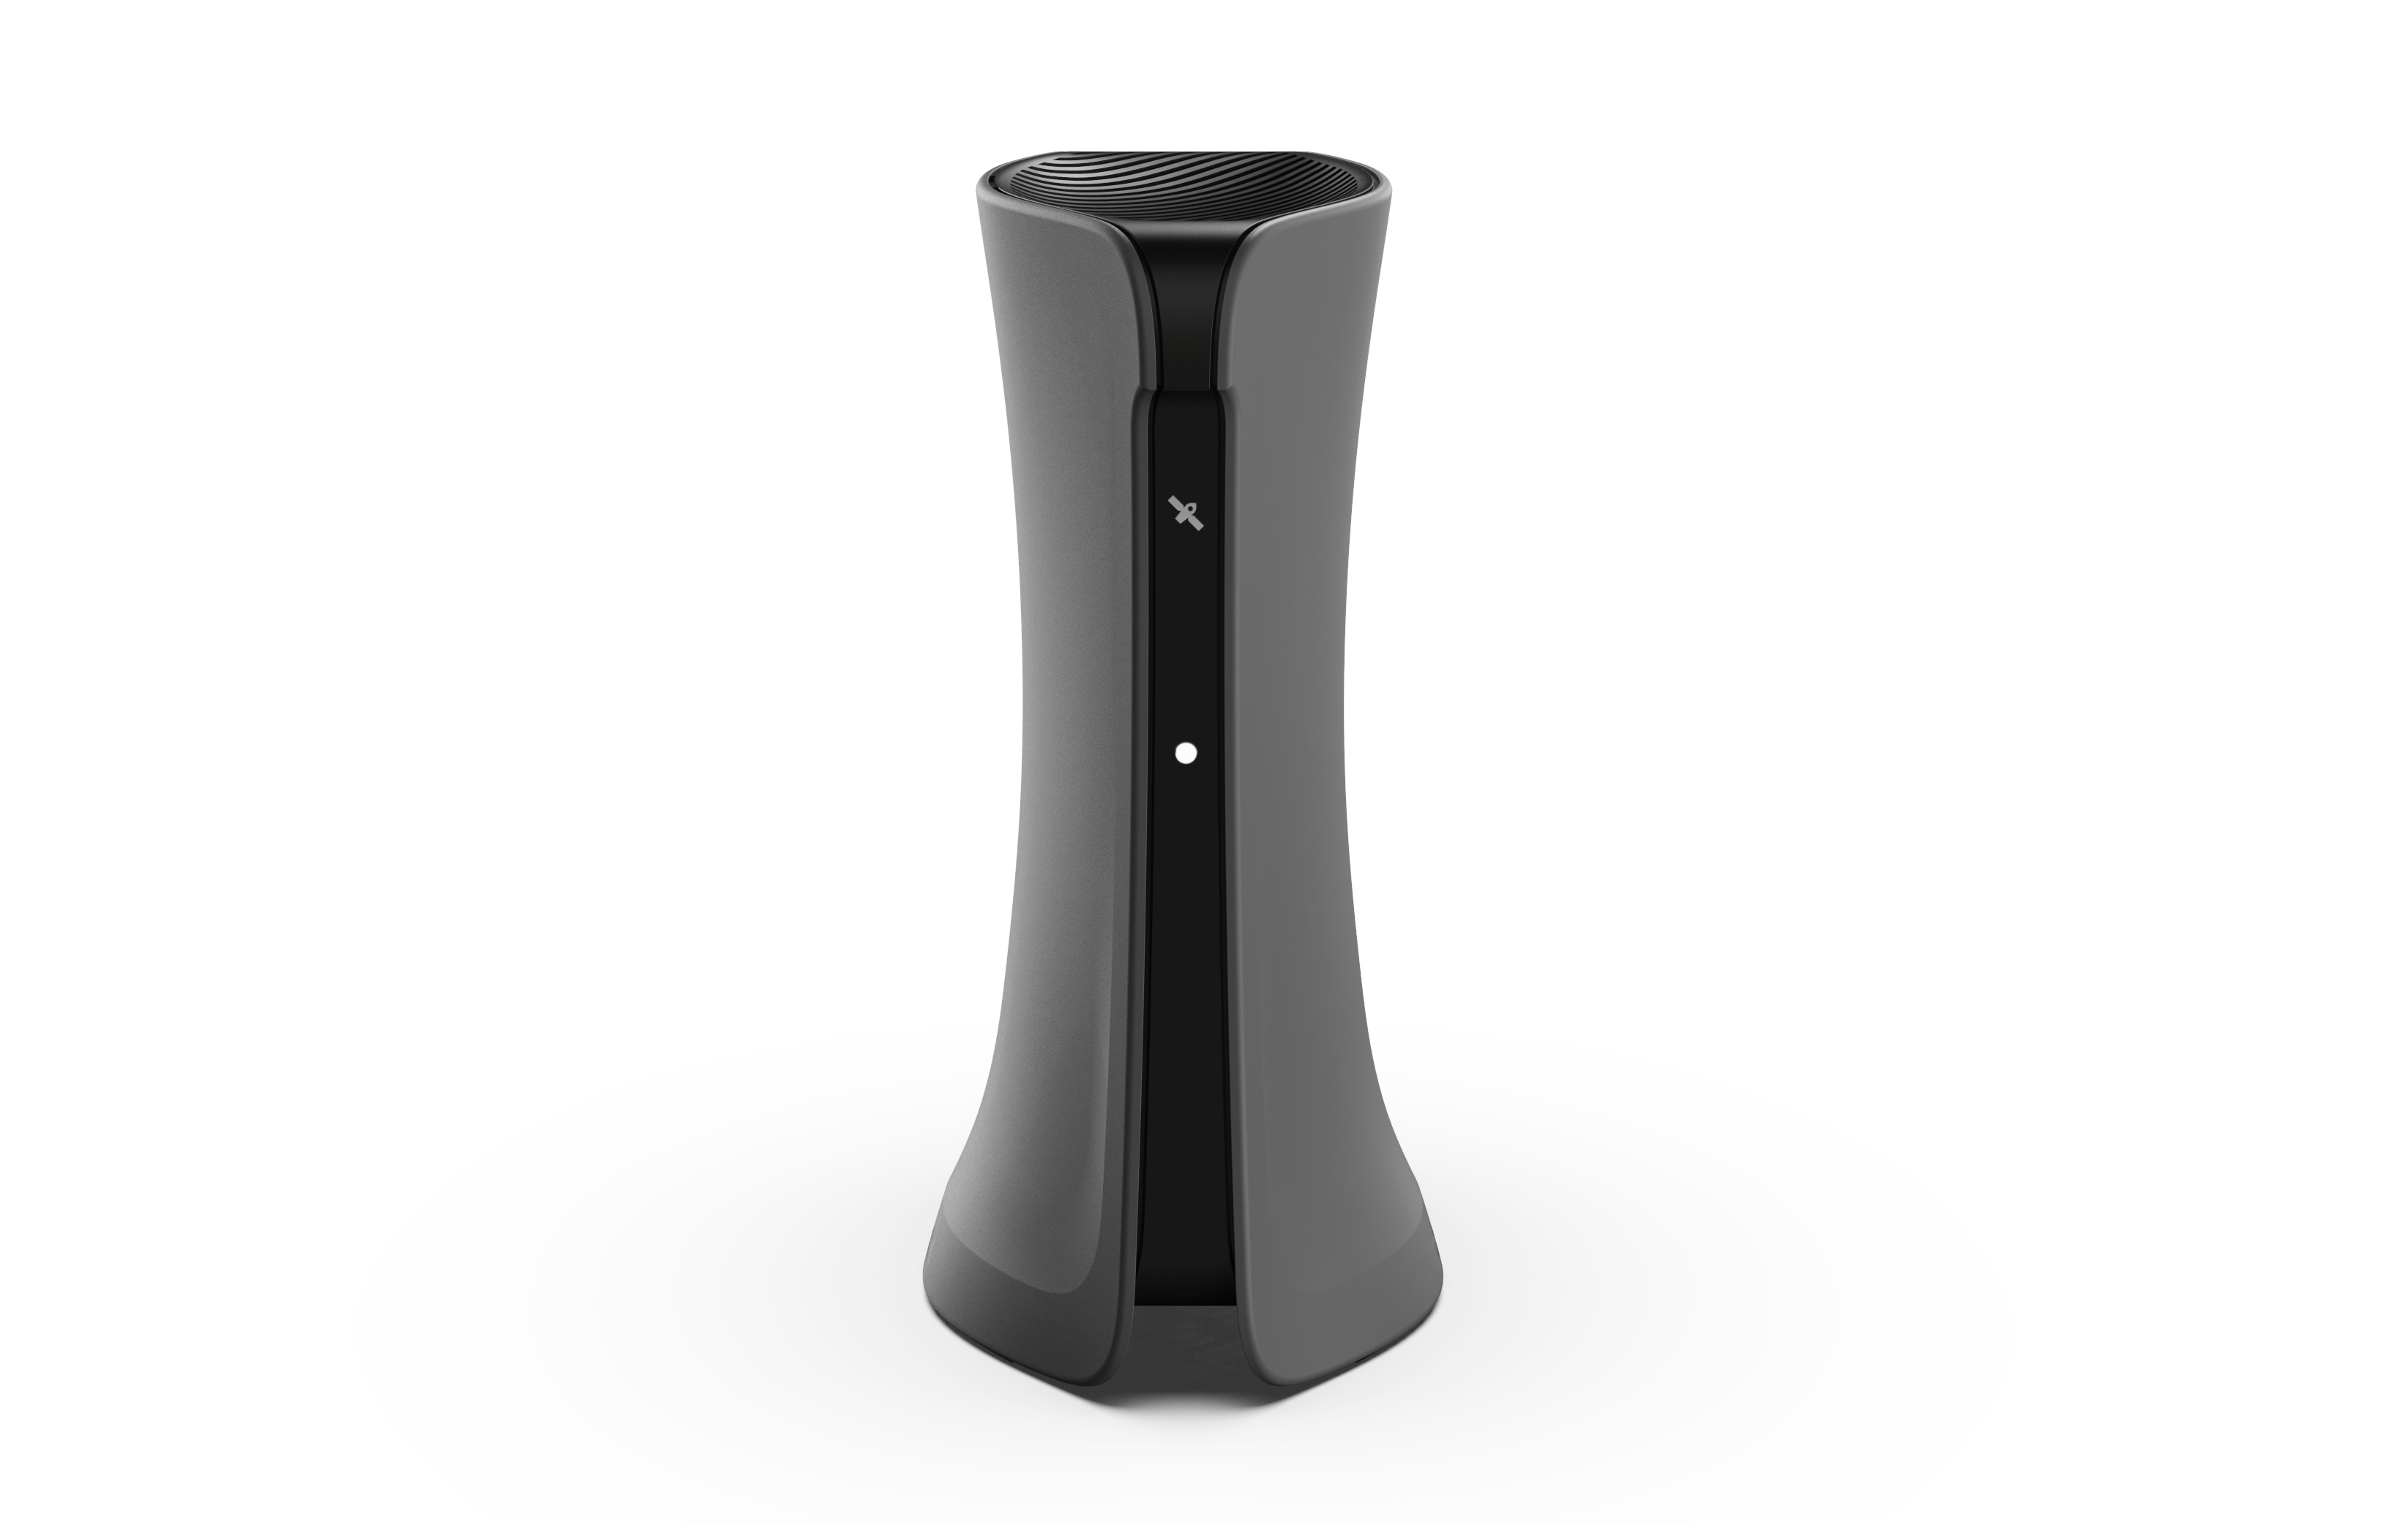 tower-style WiFi 5 pod